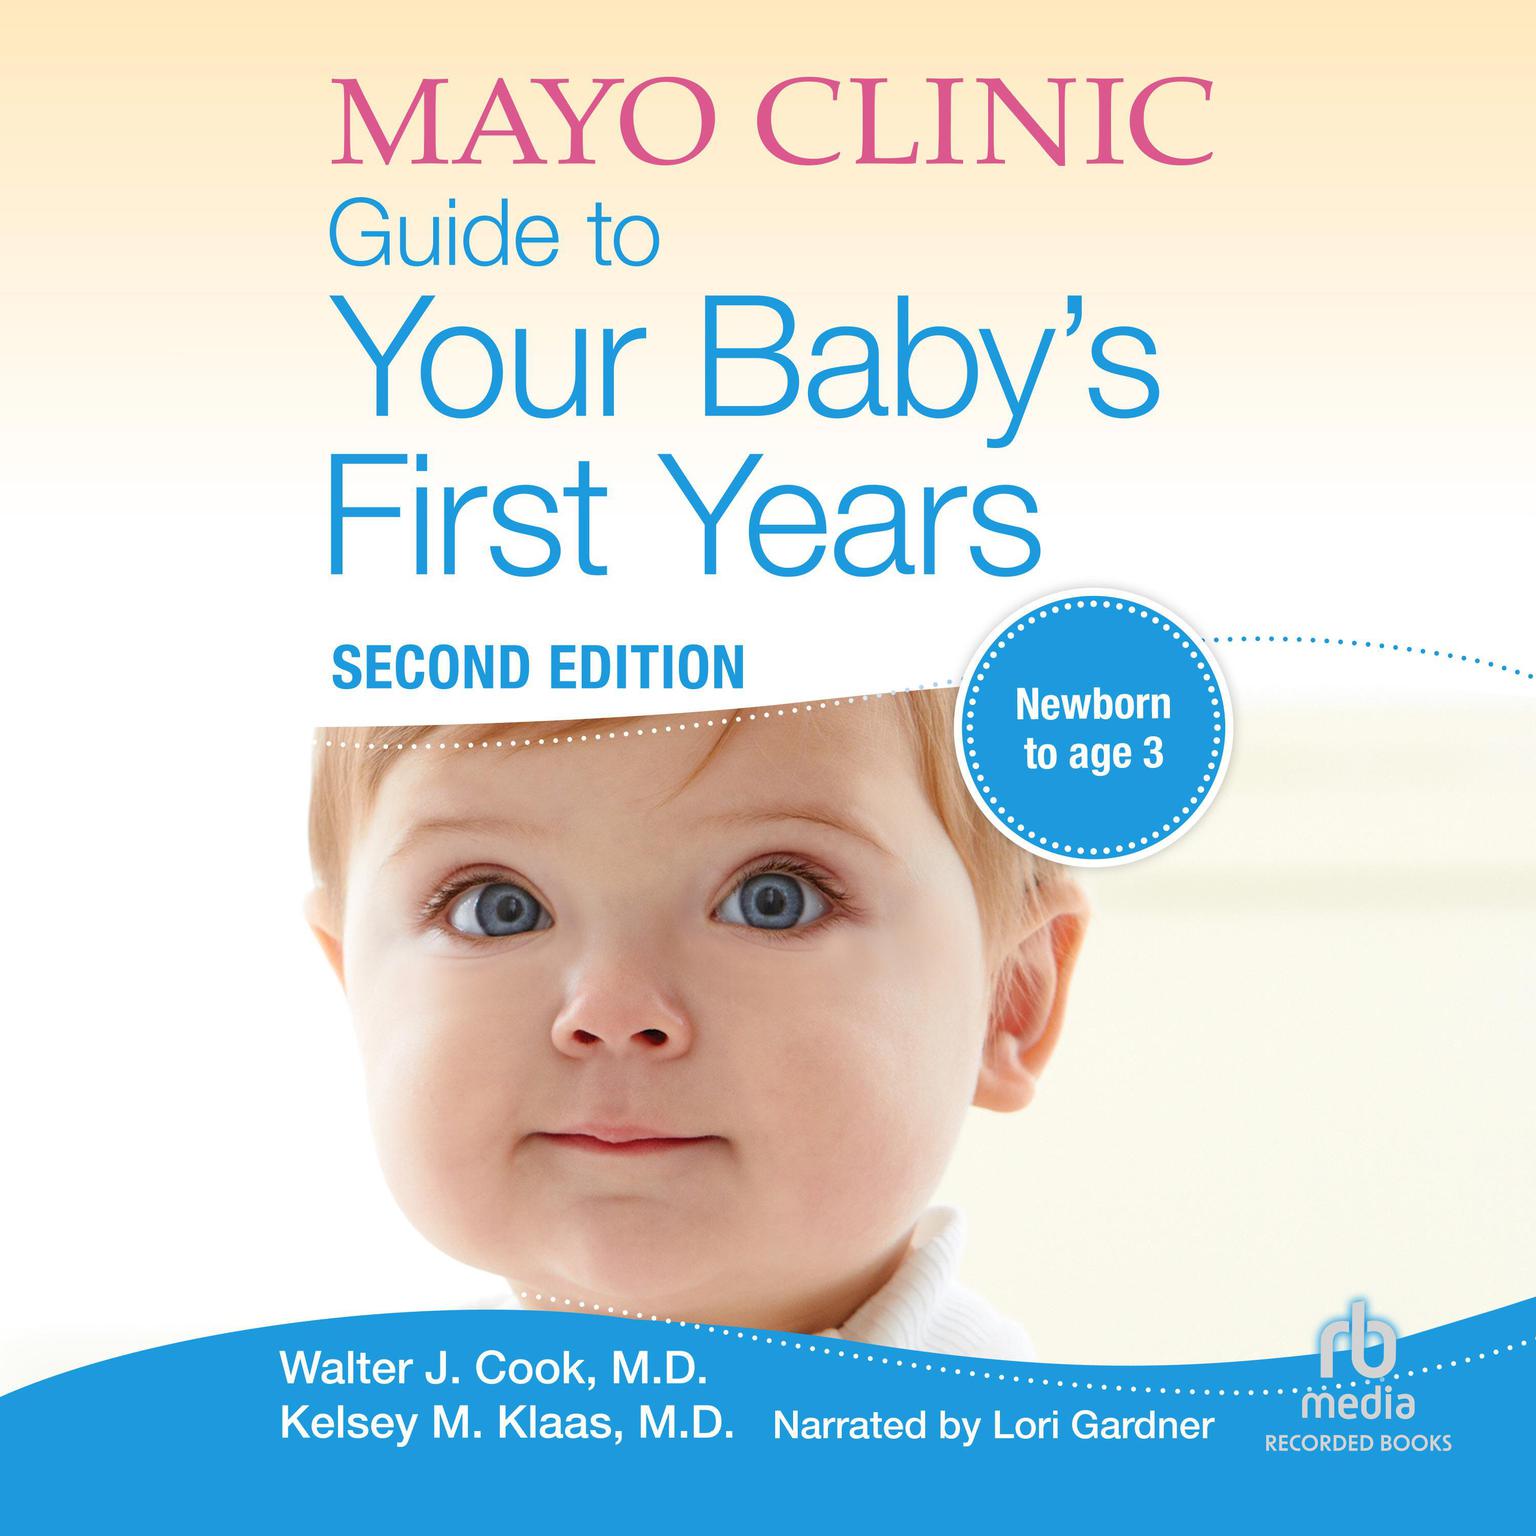 The Mayo Clinic Guide to Your Babys First Years: 2nd Edition, Revised and Updated Audiobook, by Walter Cook